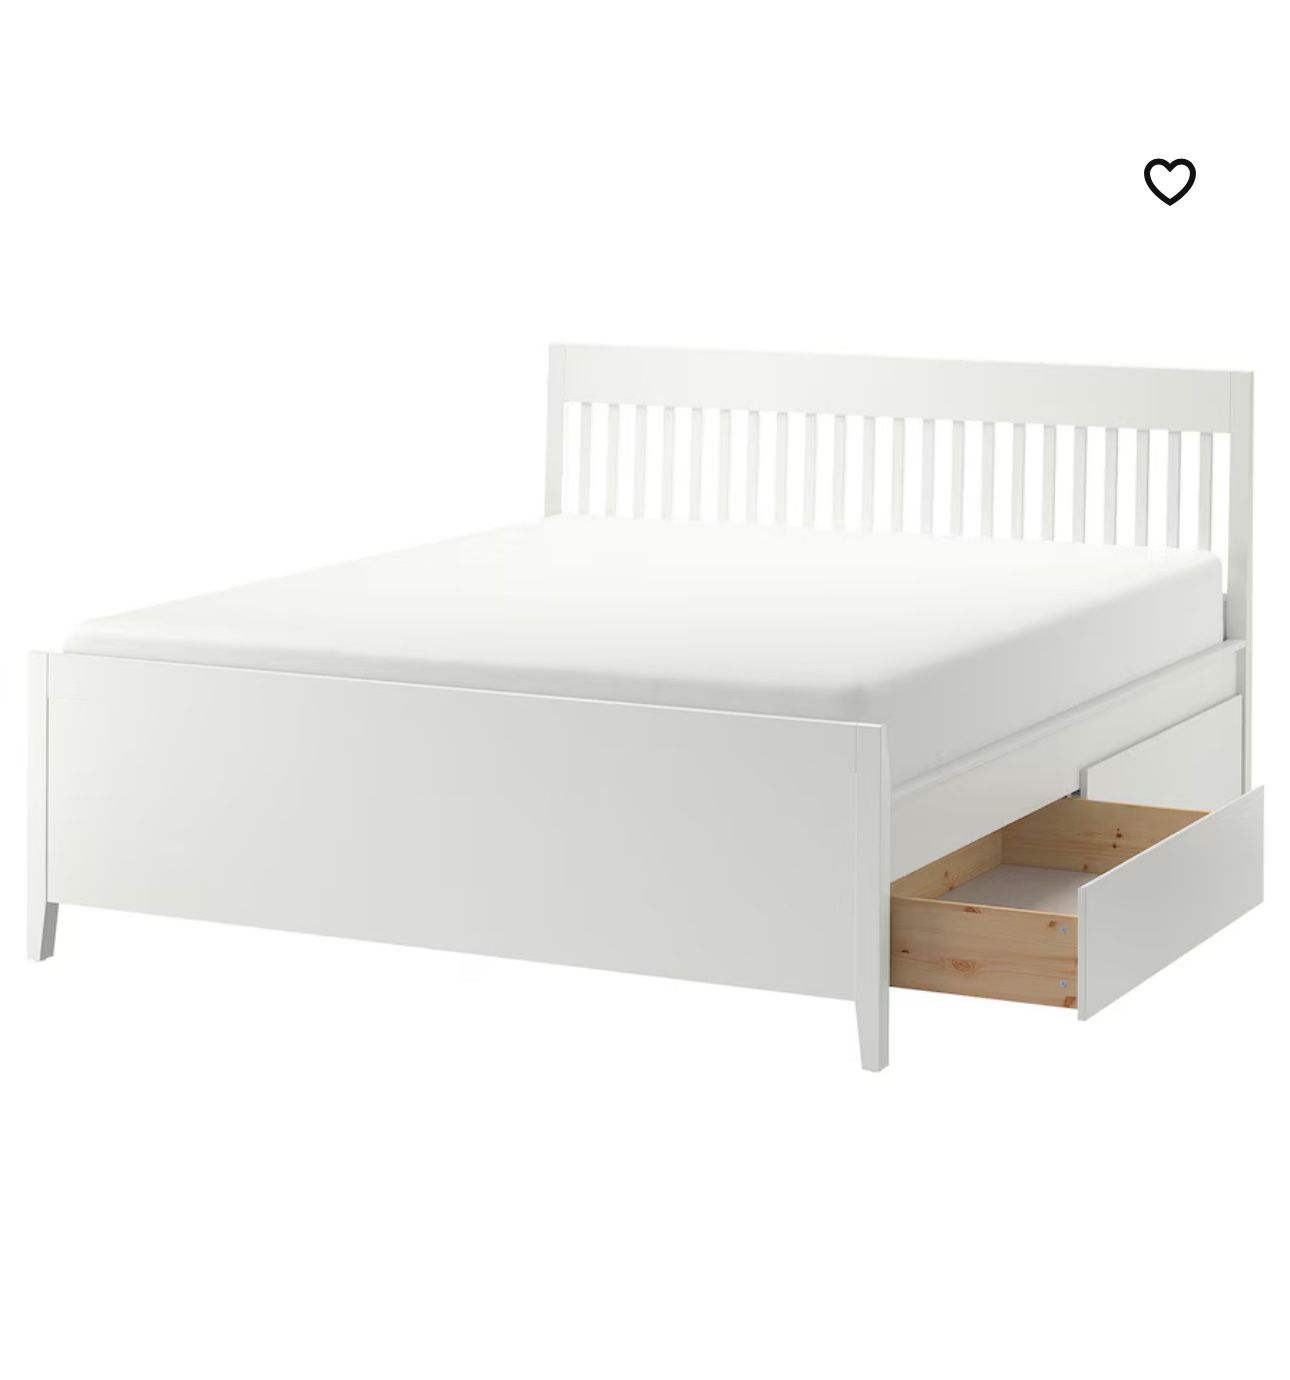 Bed frame with storage, white, King